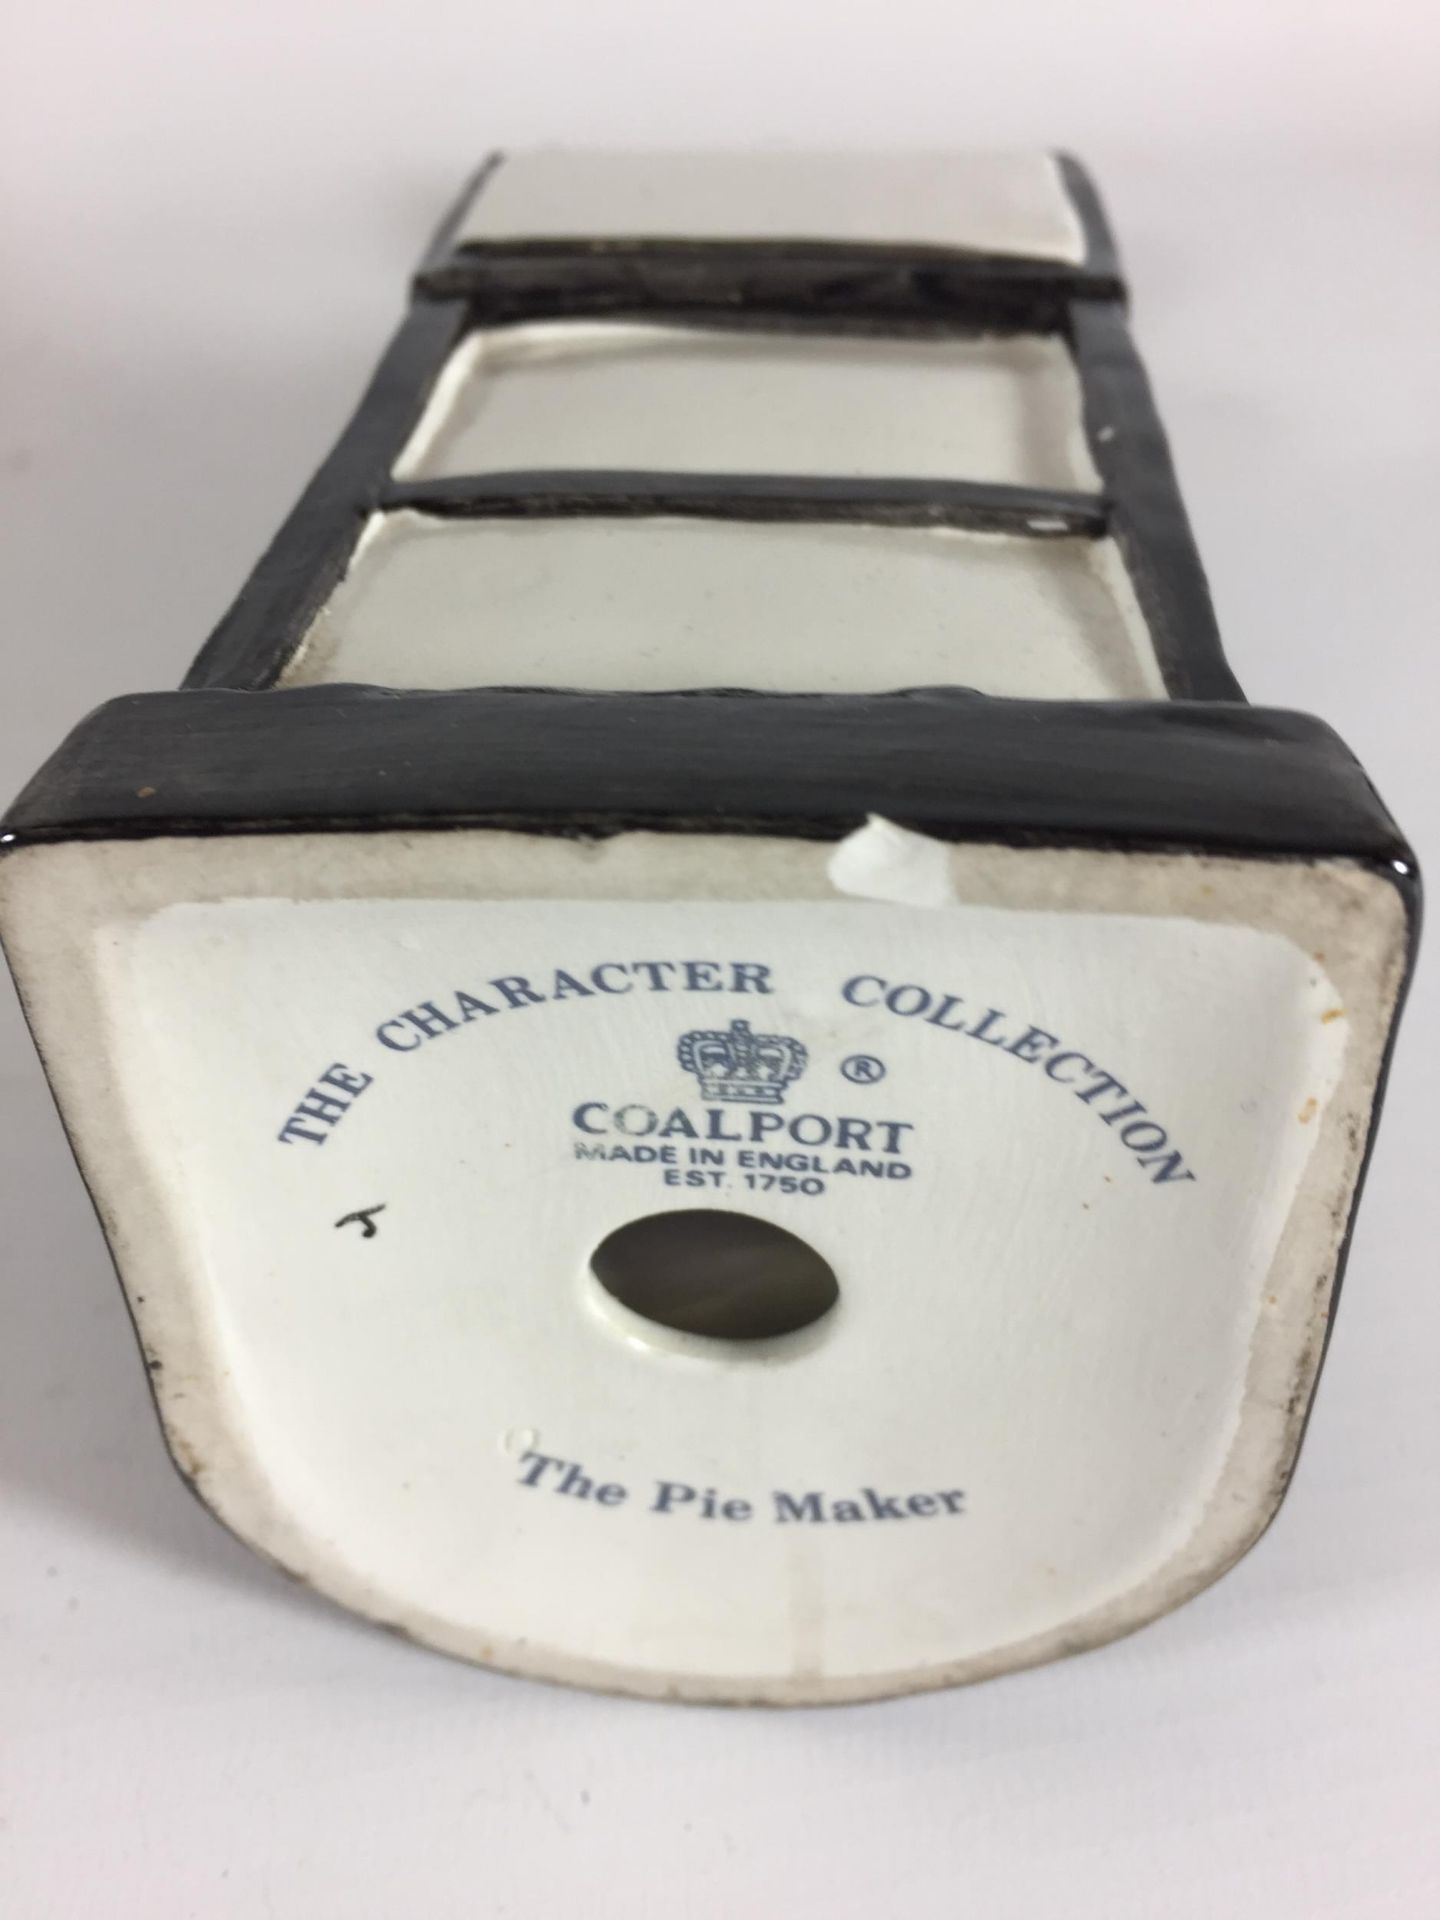 A COALPORT 'THE CHARACTER COLLECTION' THE PIE MAKER FIGURE - Image 4 of 4